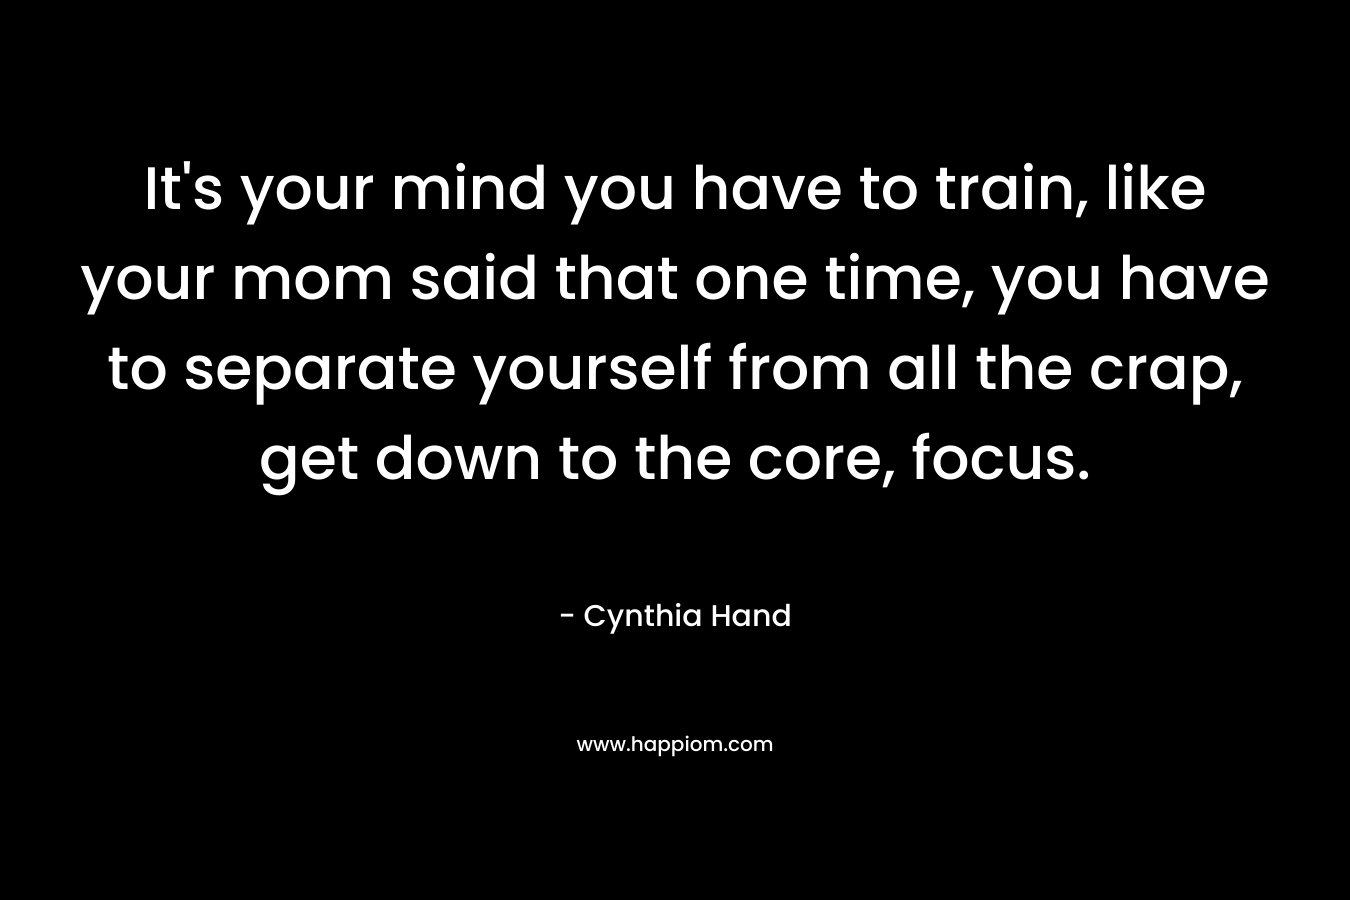 It’s your mind you have to train, like your mom said that one time, you have to separate yourself from all the crap, get down to the core, focus. – Cynthia Hand